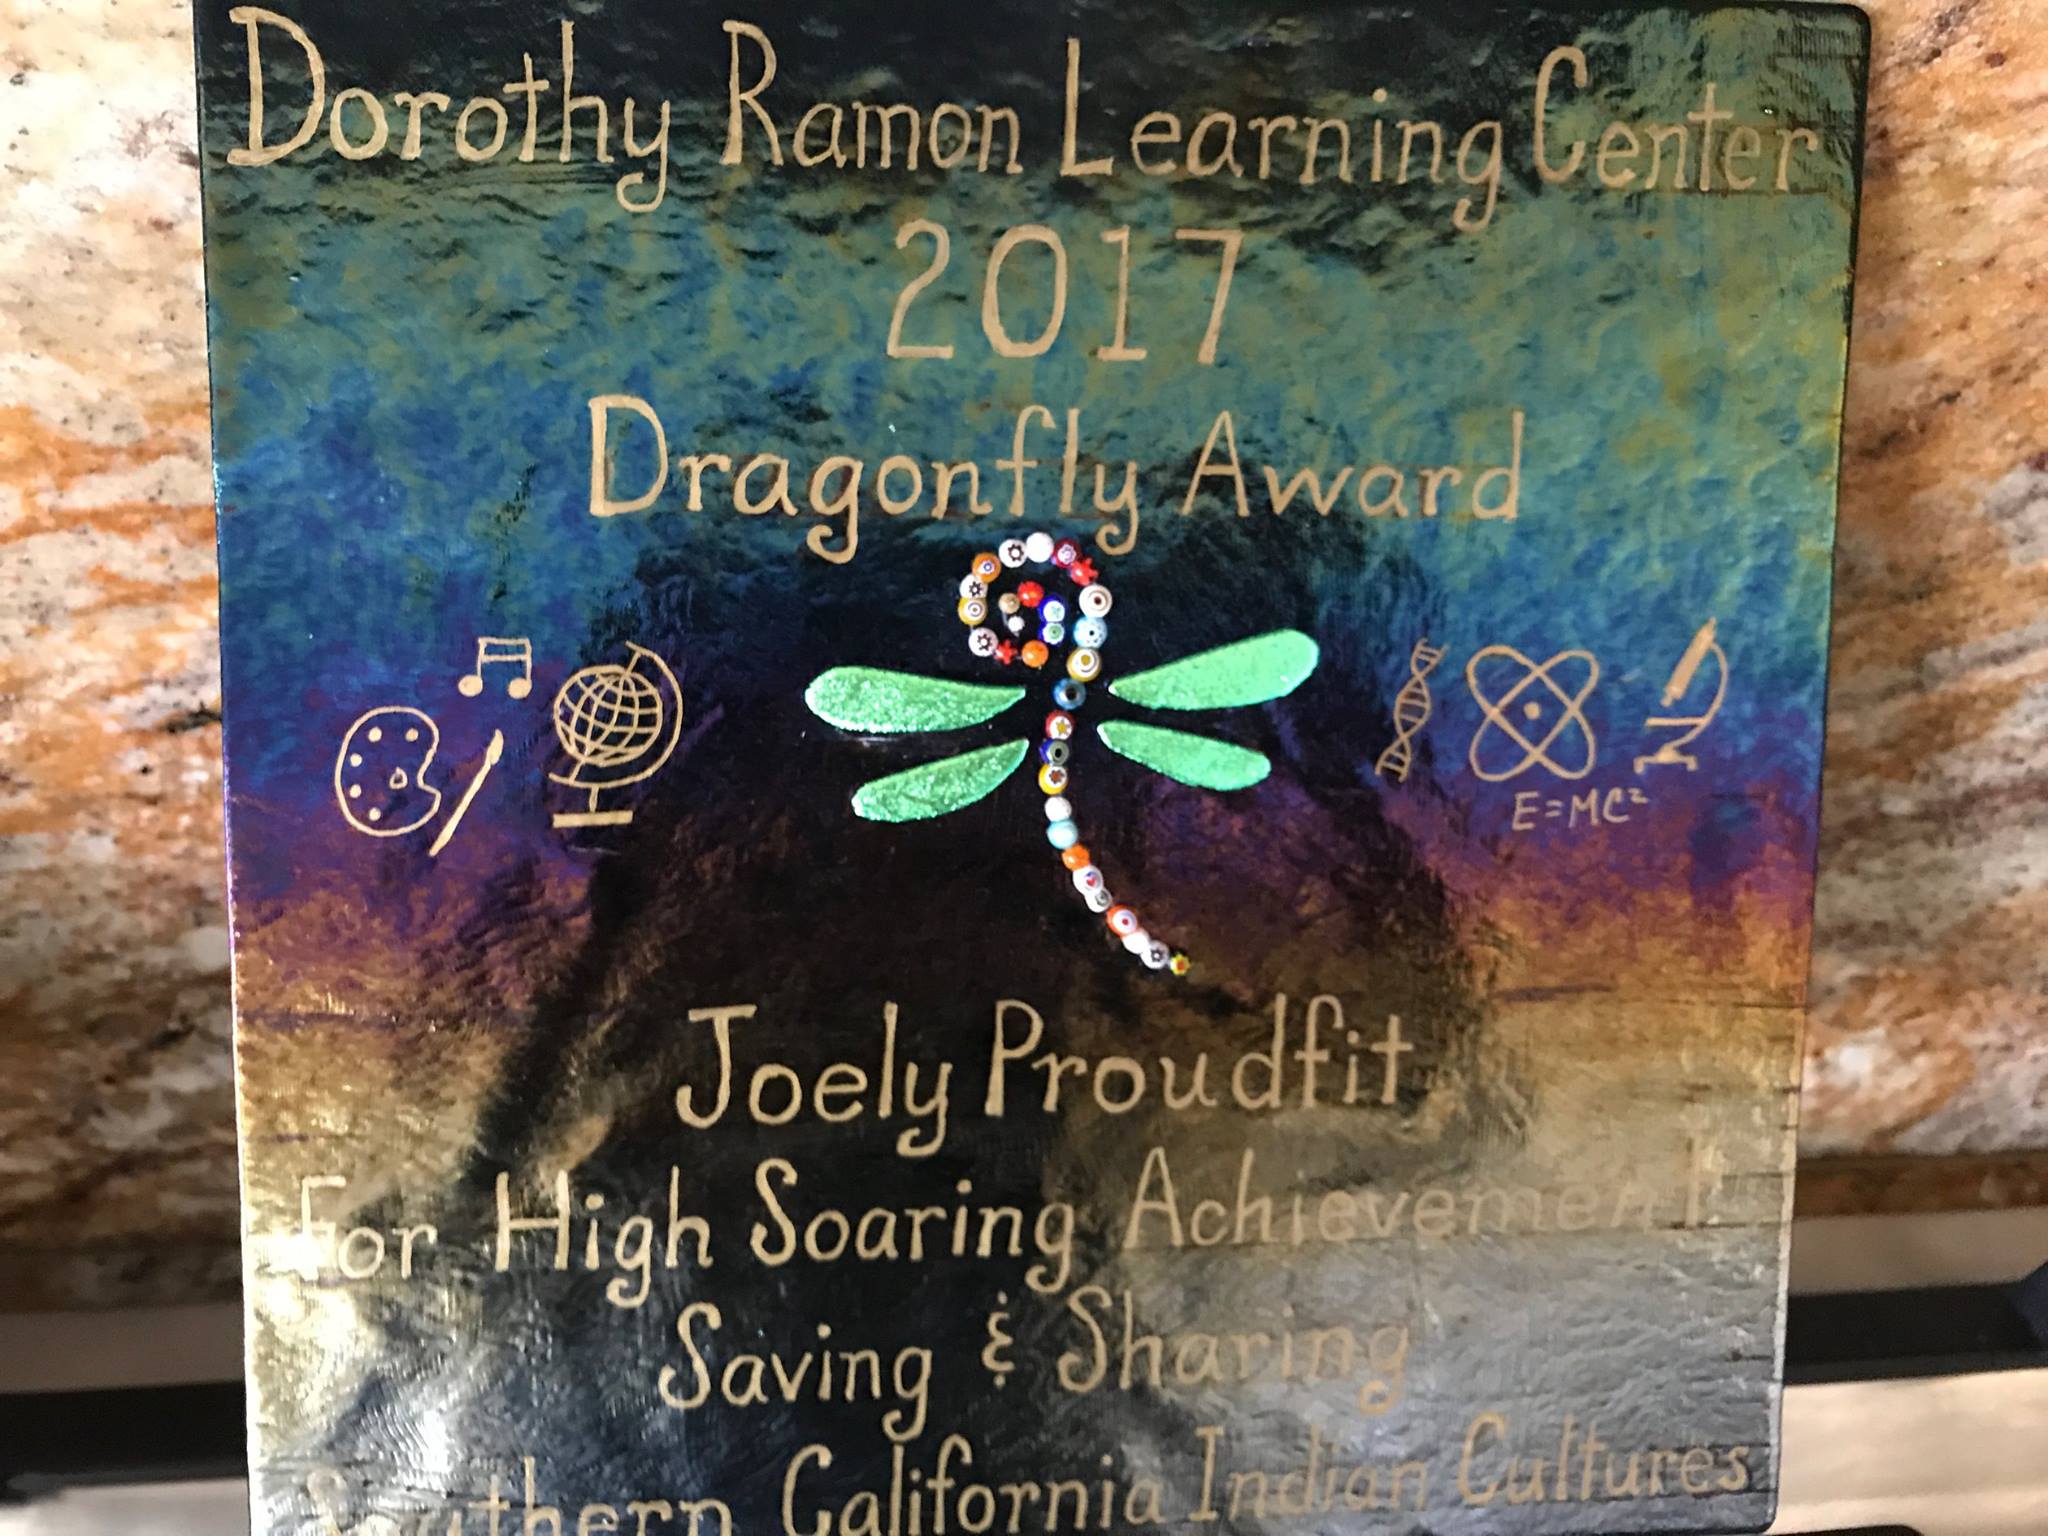 A plaque with the words, "Dorothy Ramon Learning Center 2017 Dragonfly Award Joely Proudfit For High Soaring Achievement Saving & Sharing Southern California Indian Cultures" and a large image of a dragonfly with sparkling green wings and a body made out of beads, and smaller symbols of music notes, a paint palette and brush, a globe, a DNA helix, an atom, a microscope, and the text, "E = MC^2" 